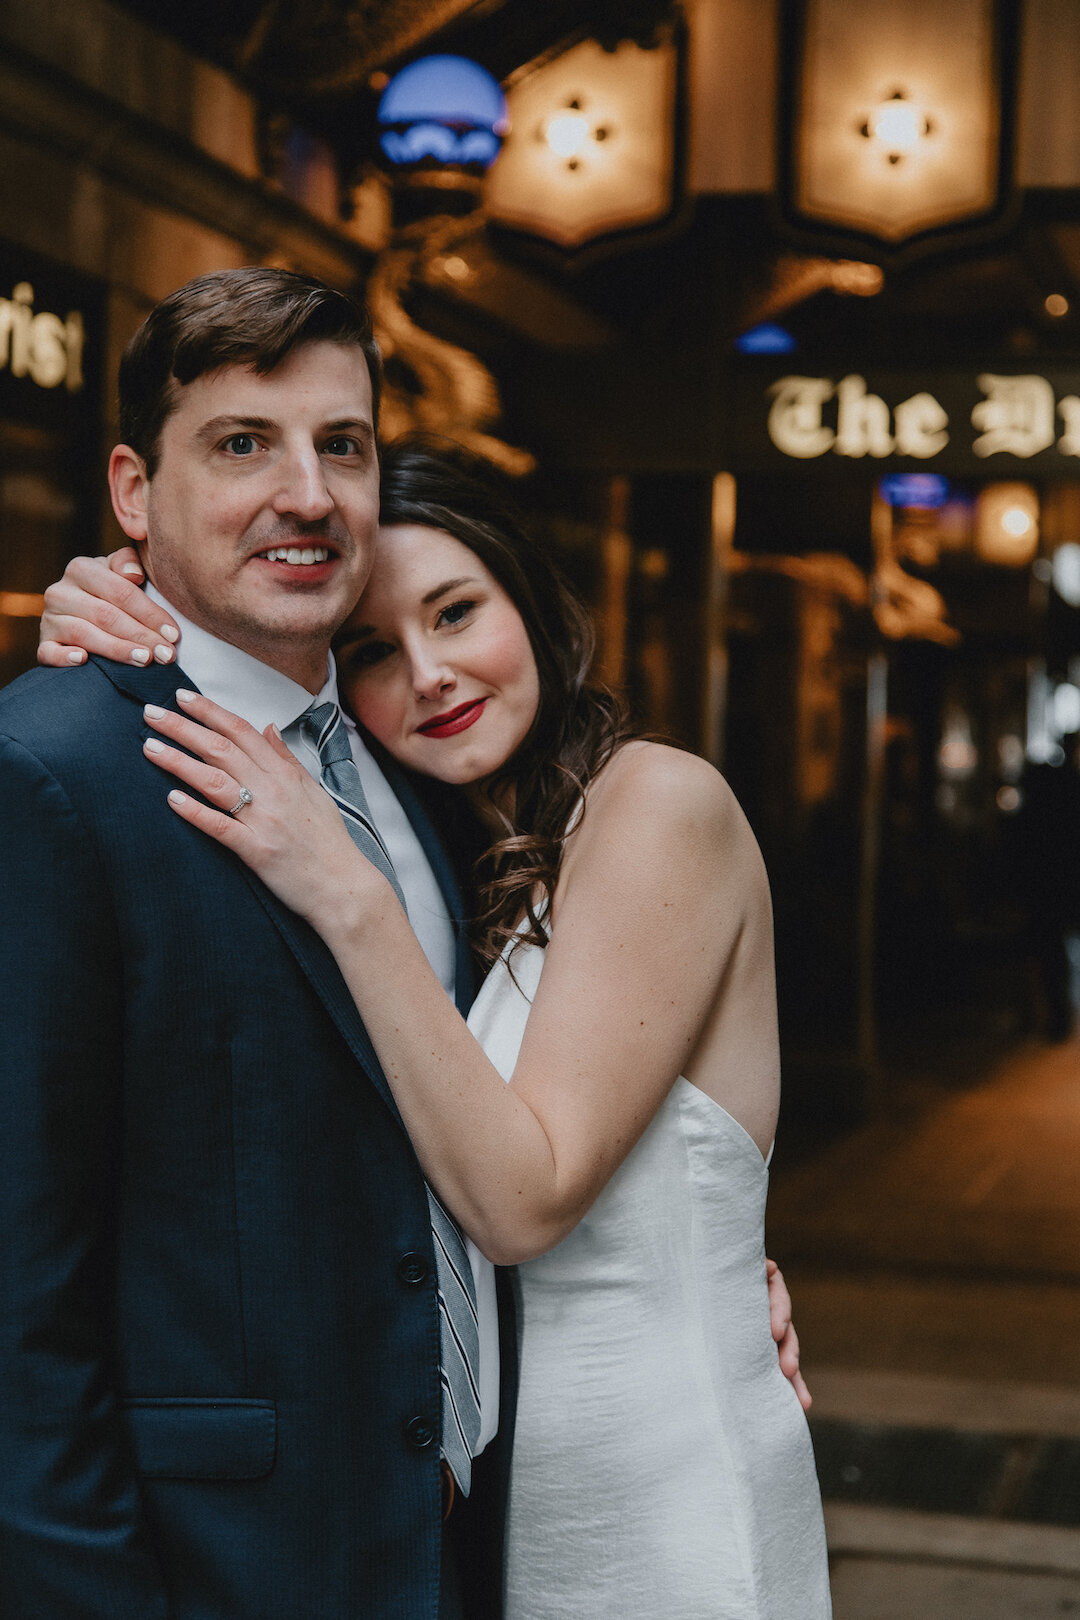 Elopement Celebration at The Drake Hotel captured by Nastasia Mora Photography featured on CHI thee WED